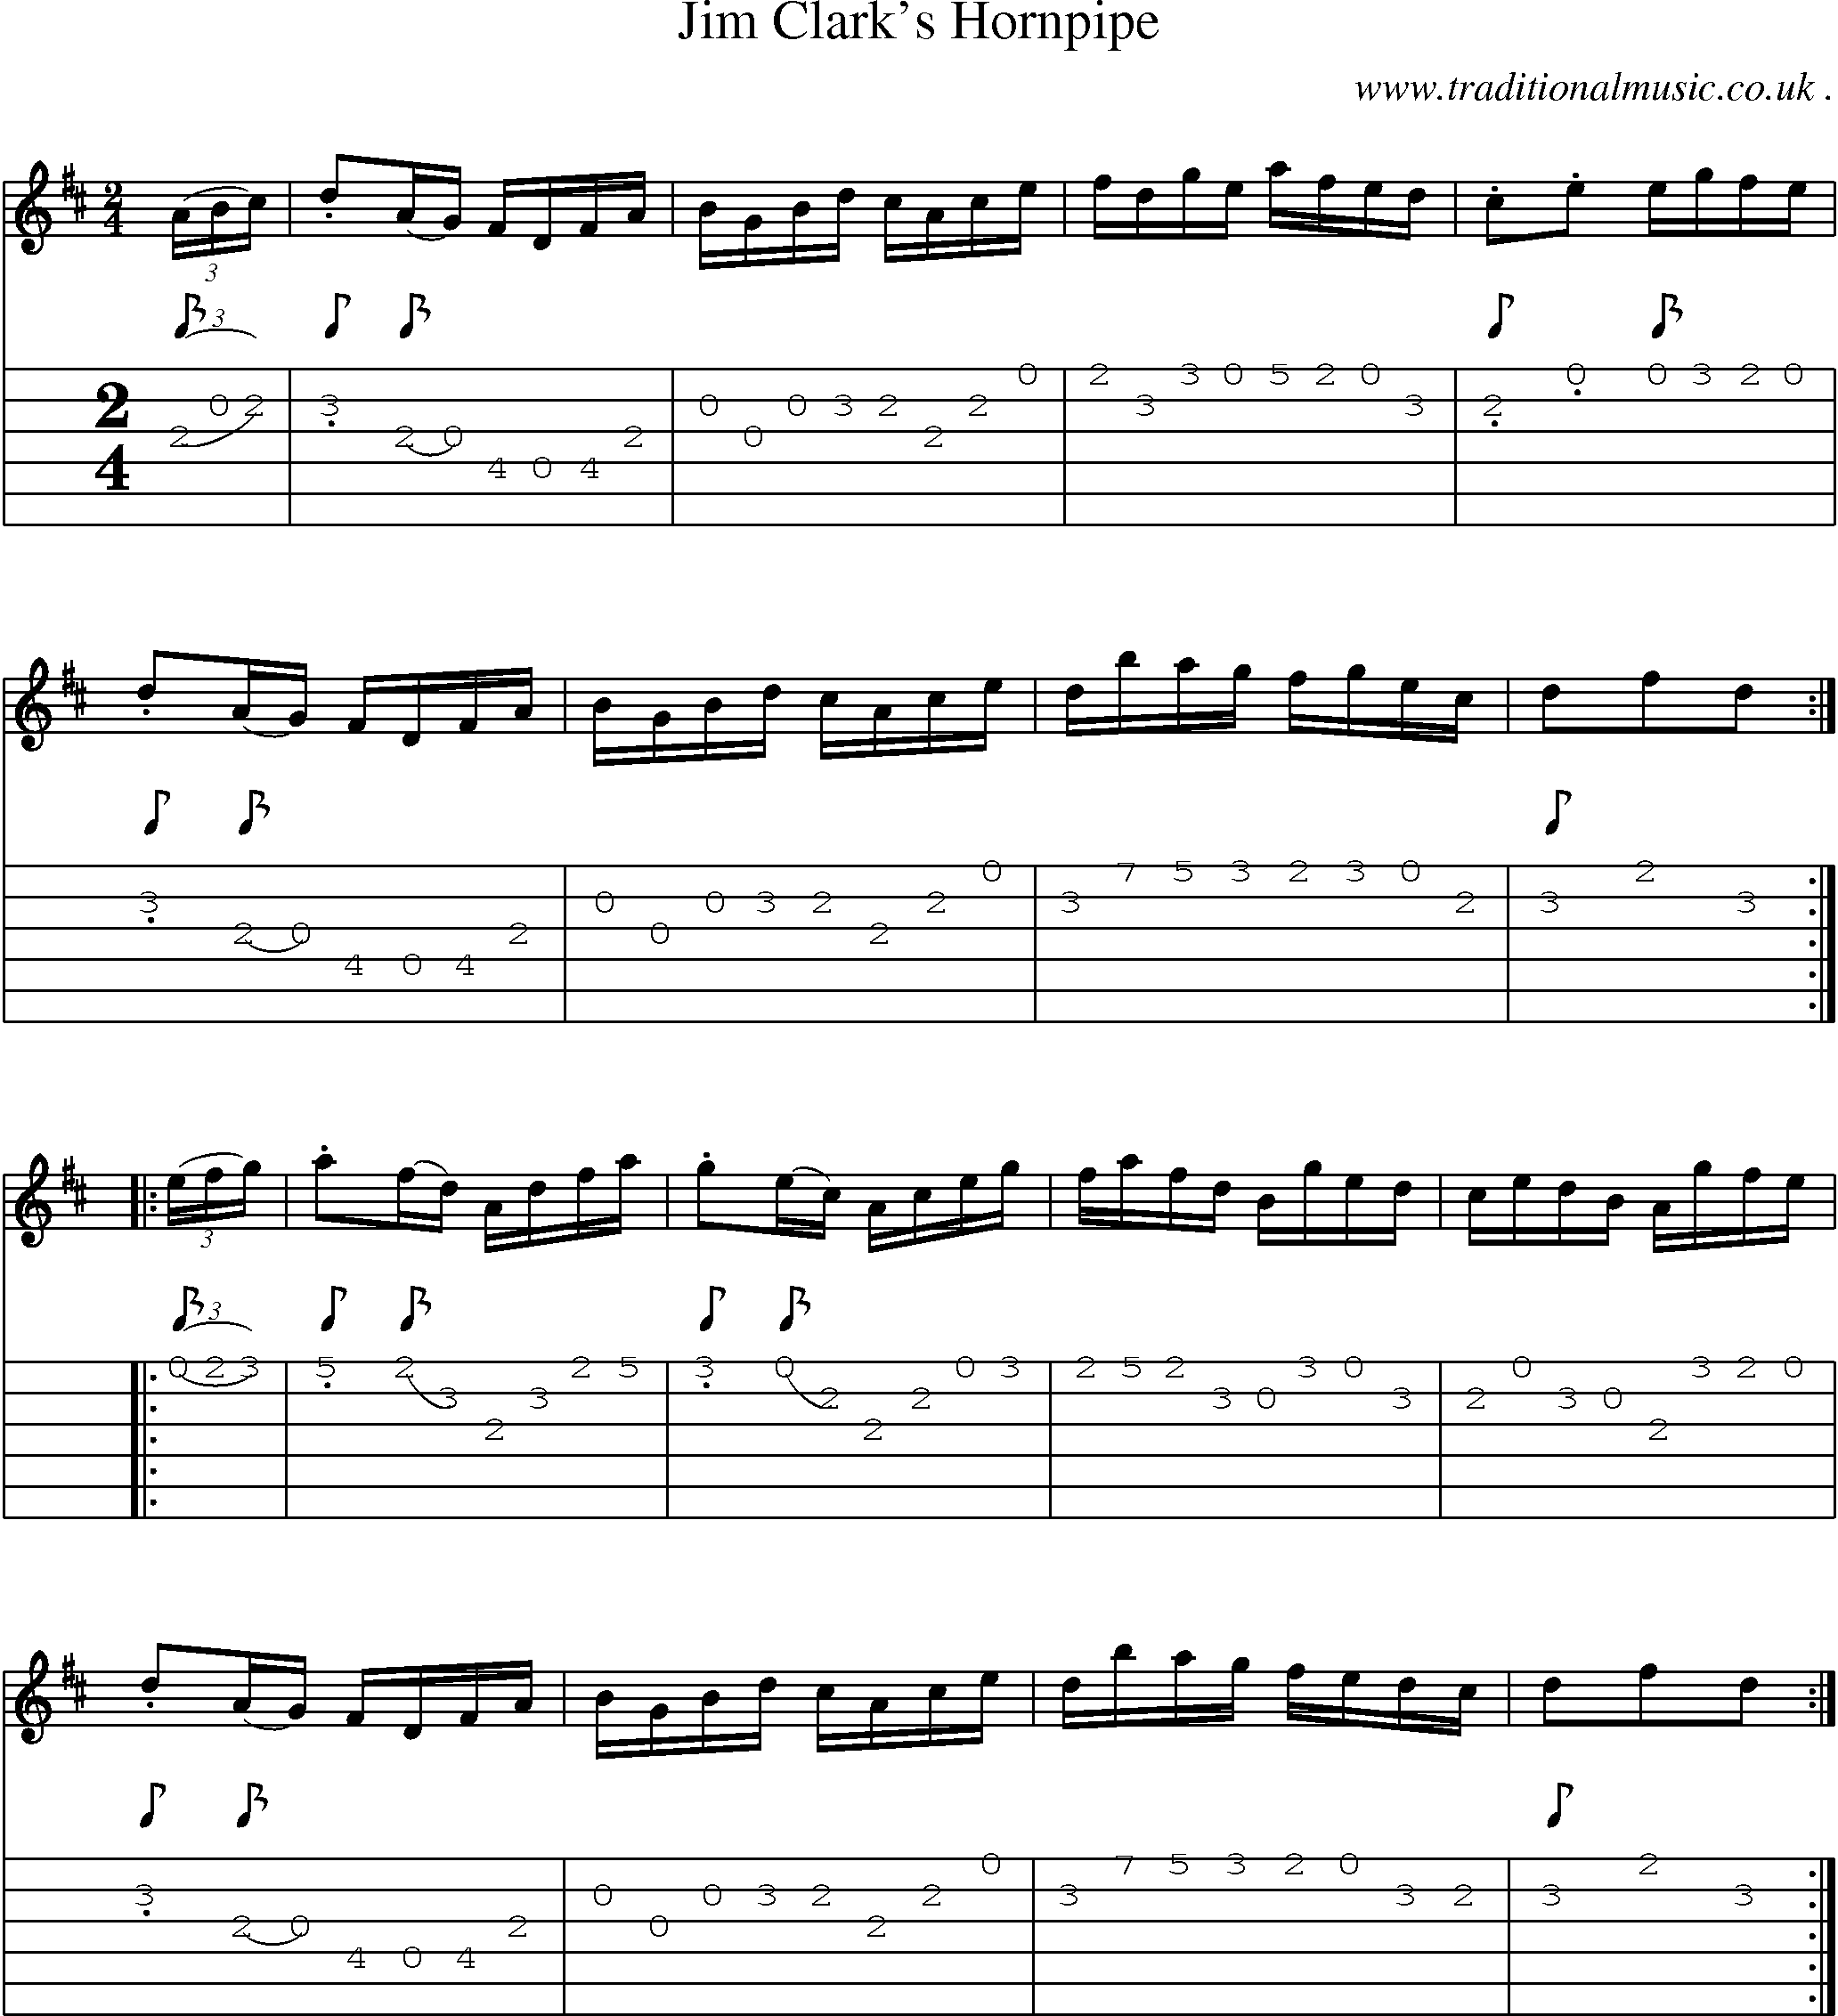 Sheet-Music and Guitar Tabs for Jim Clarks Hornpipe